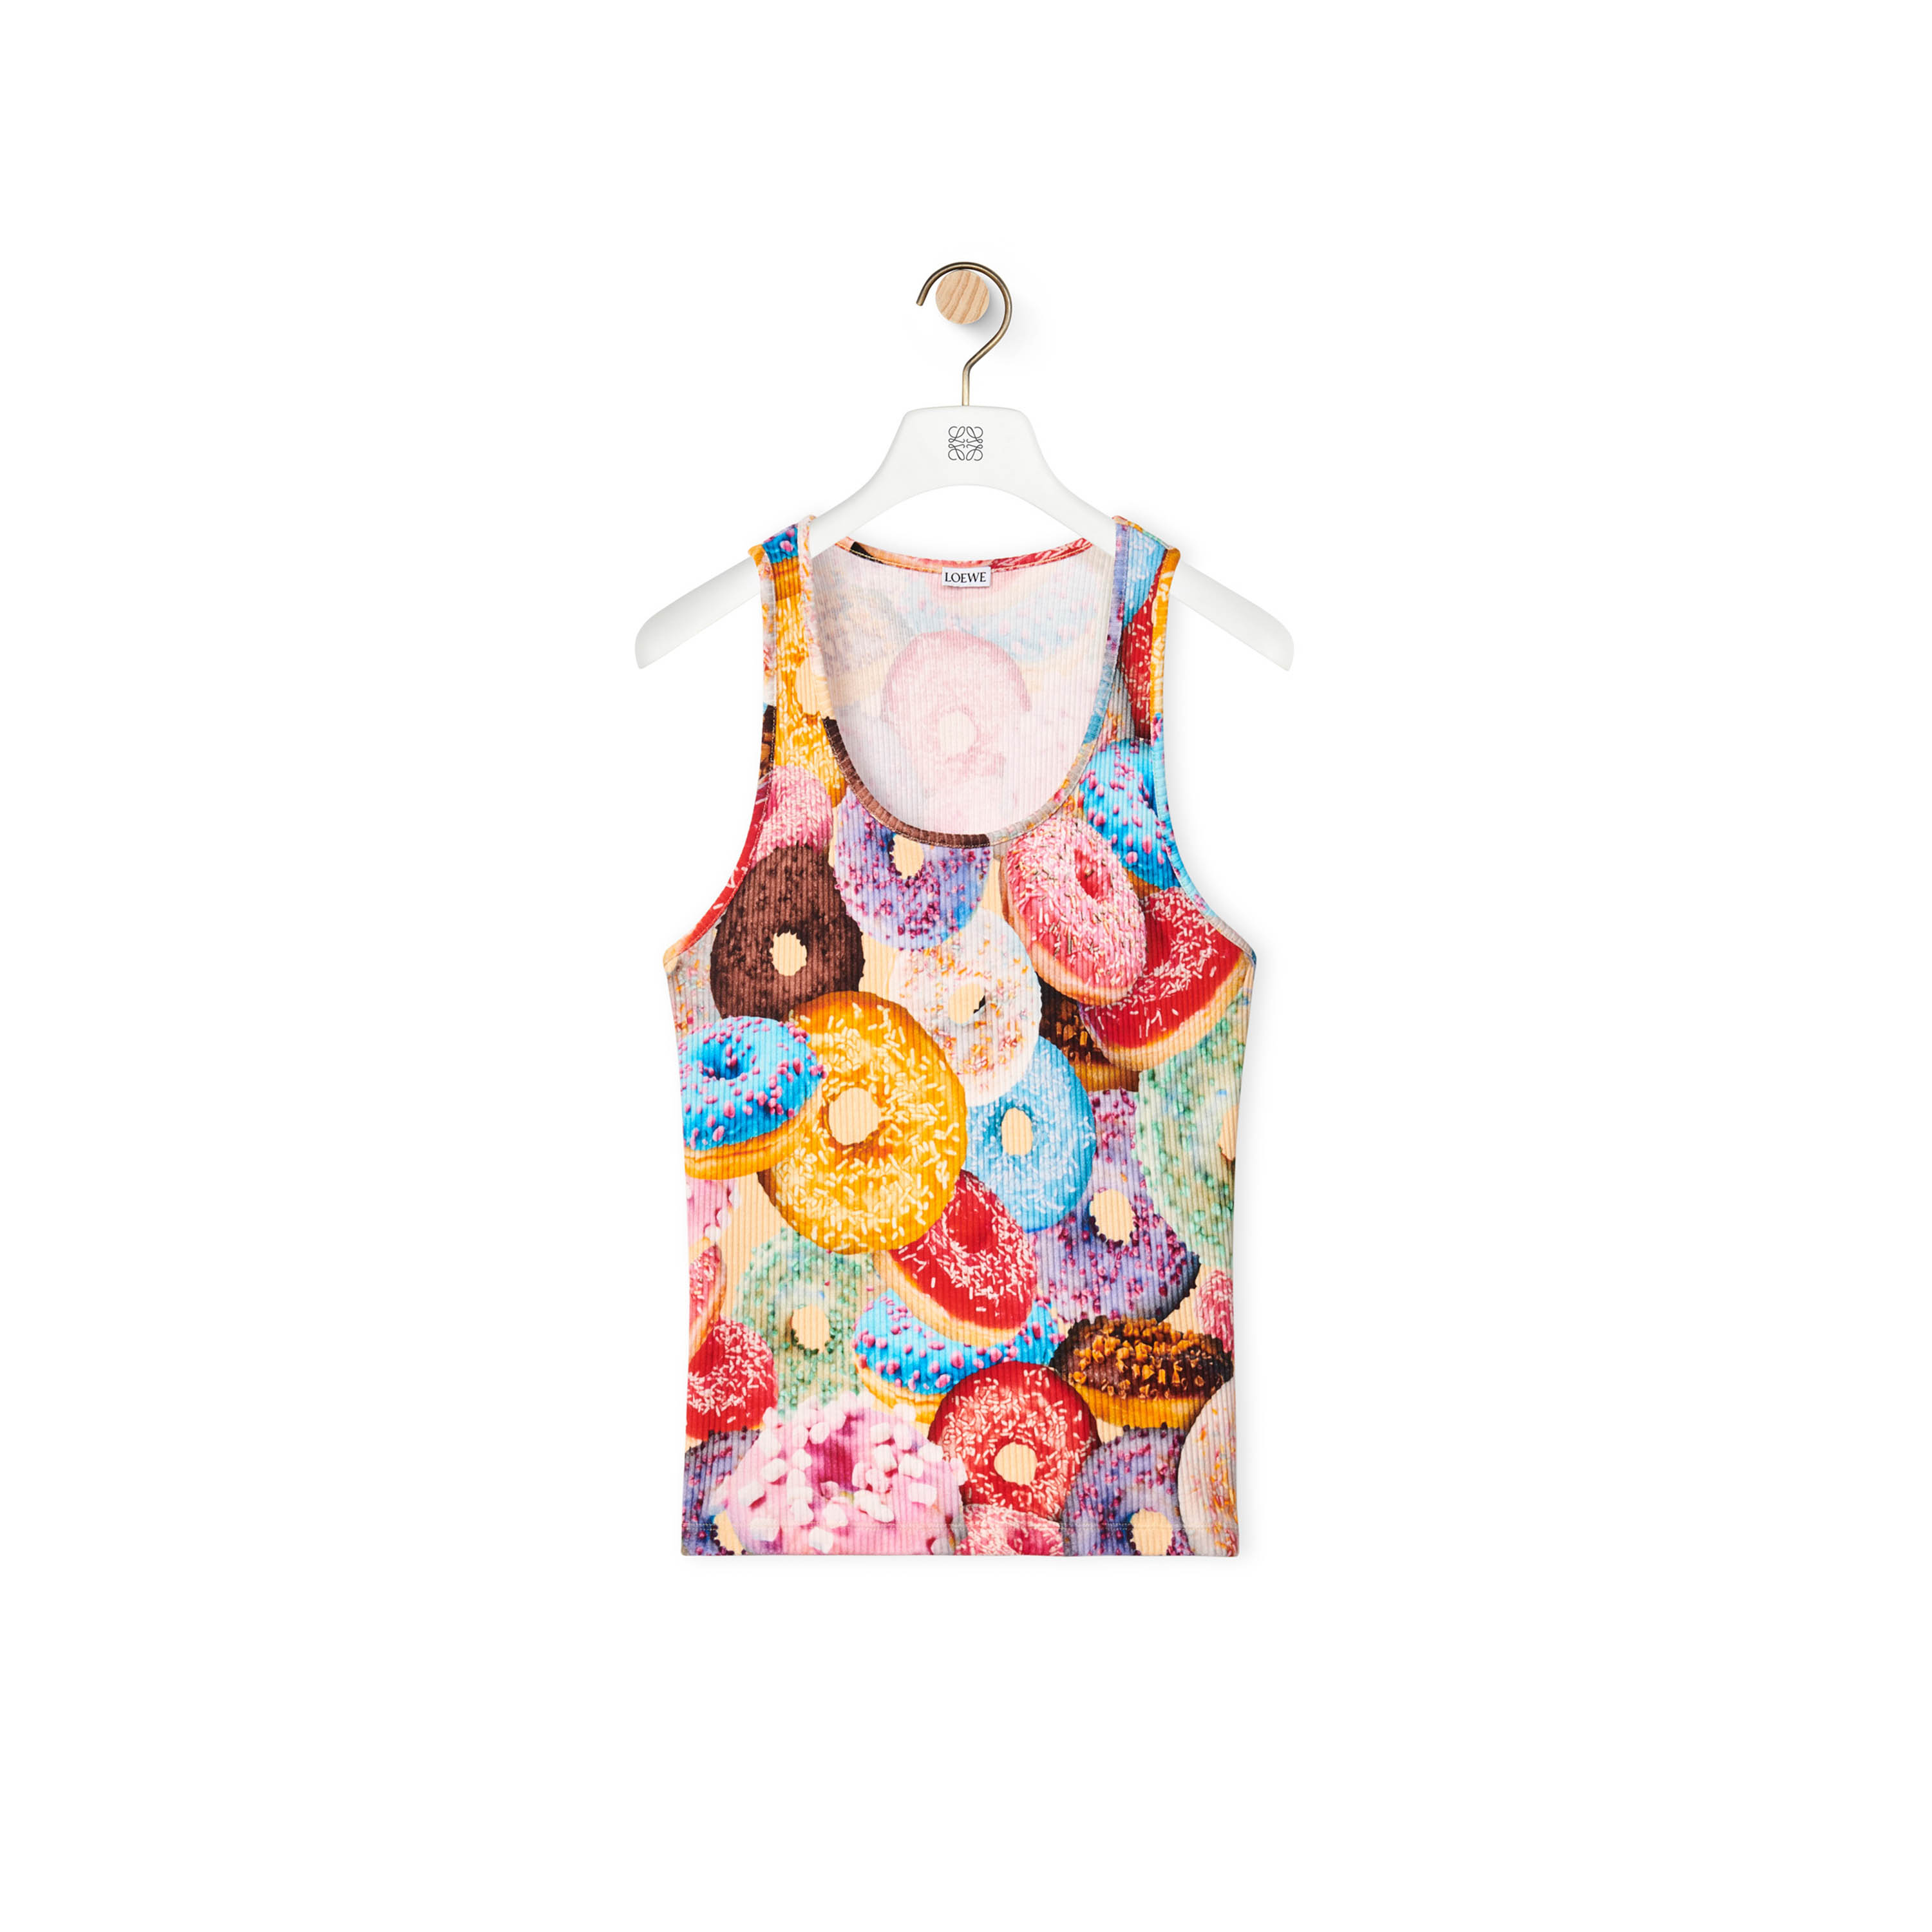 Doughnuts ribbed tank top in cotton